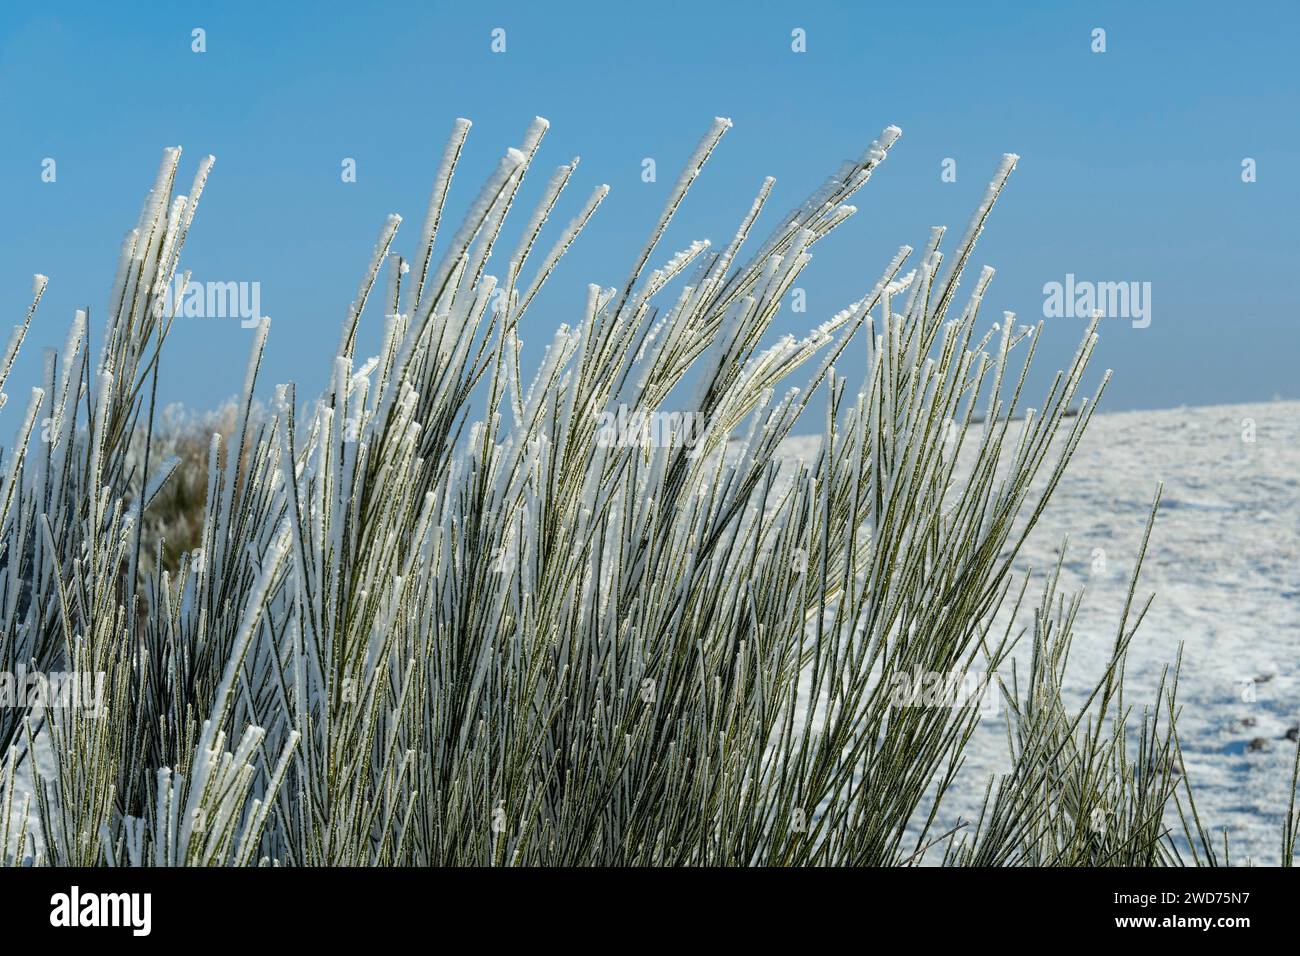 The tall grass in a meadow covered with snow Stock Photo